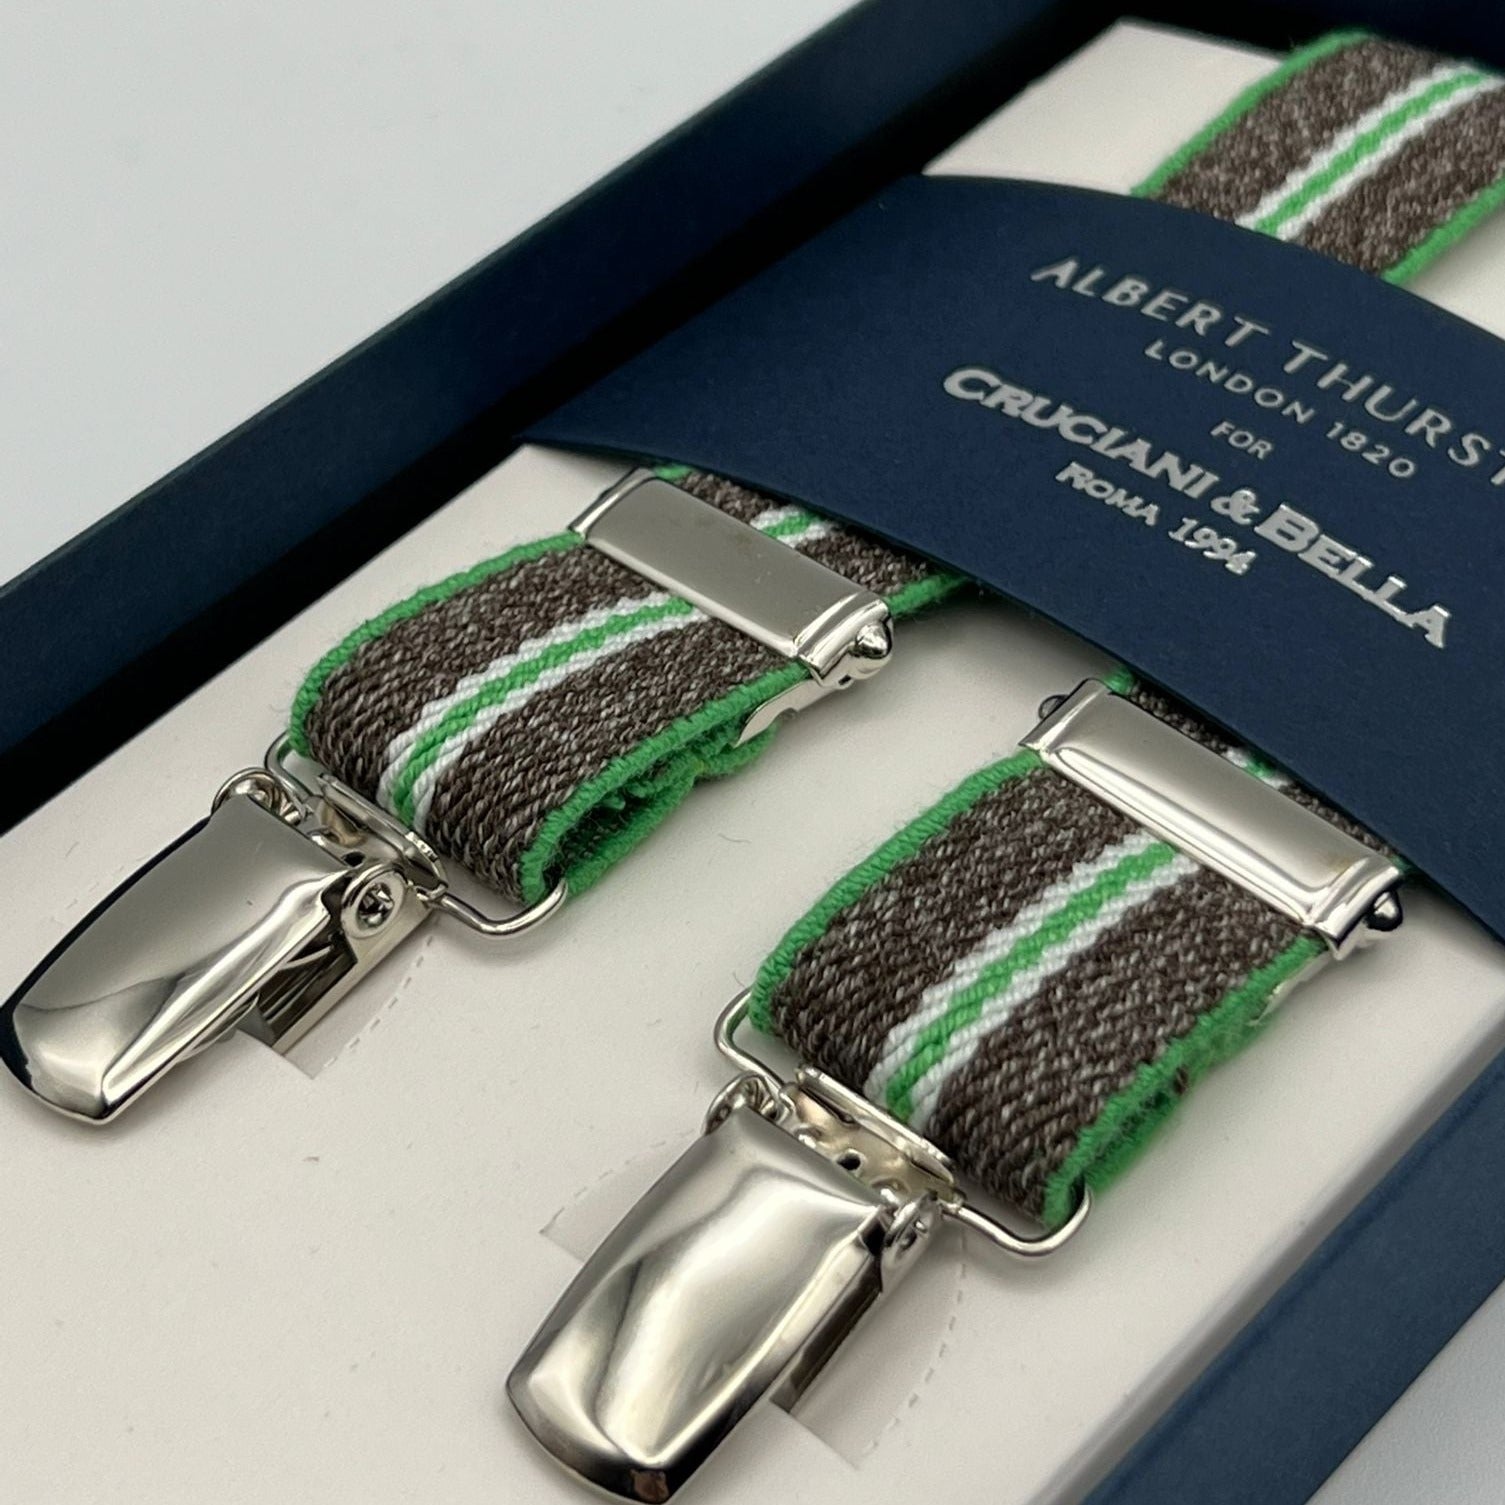 Albert Thurston for Cruciani & Bella Made in England Clip on Adjustable Sizing 25 mm elastic braces Brown, Green and White Stripes X-Shaped Nickel Fittings Size: L #7362